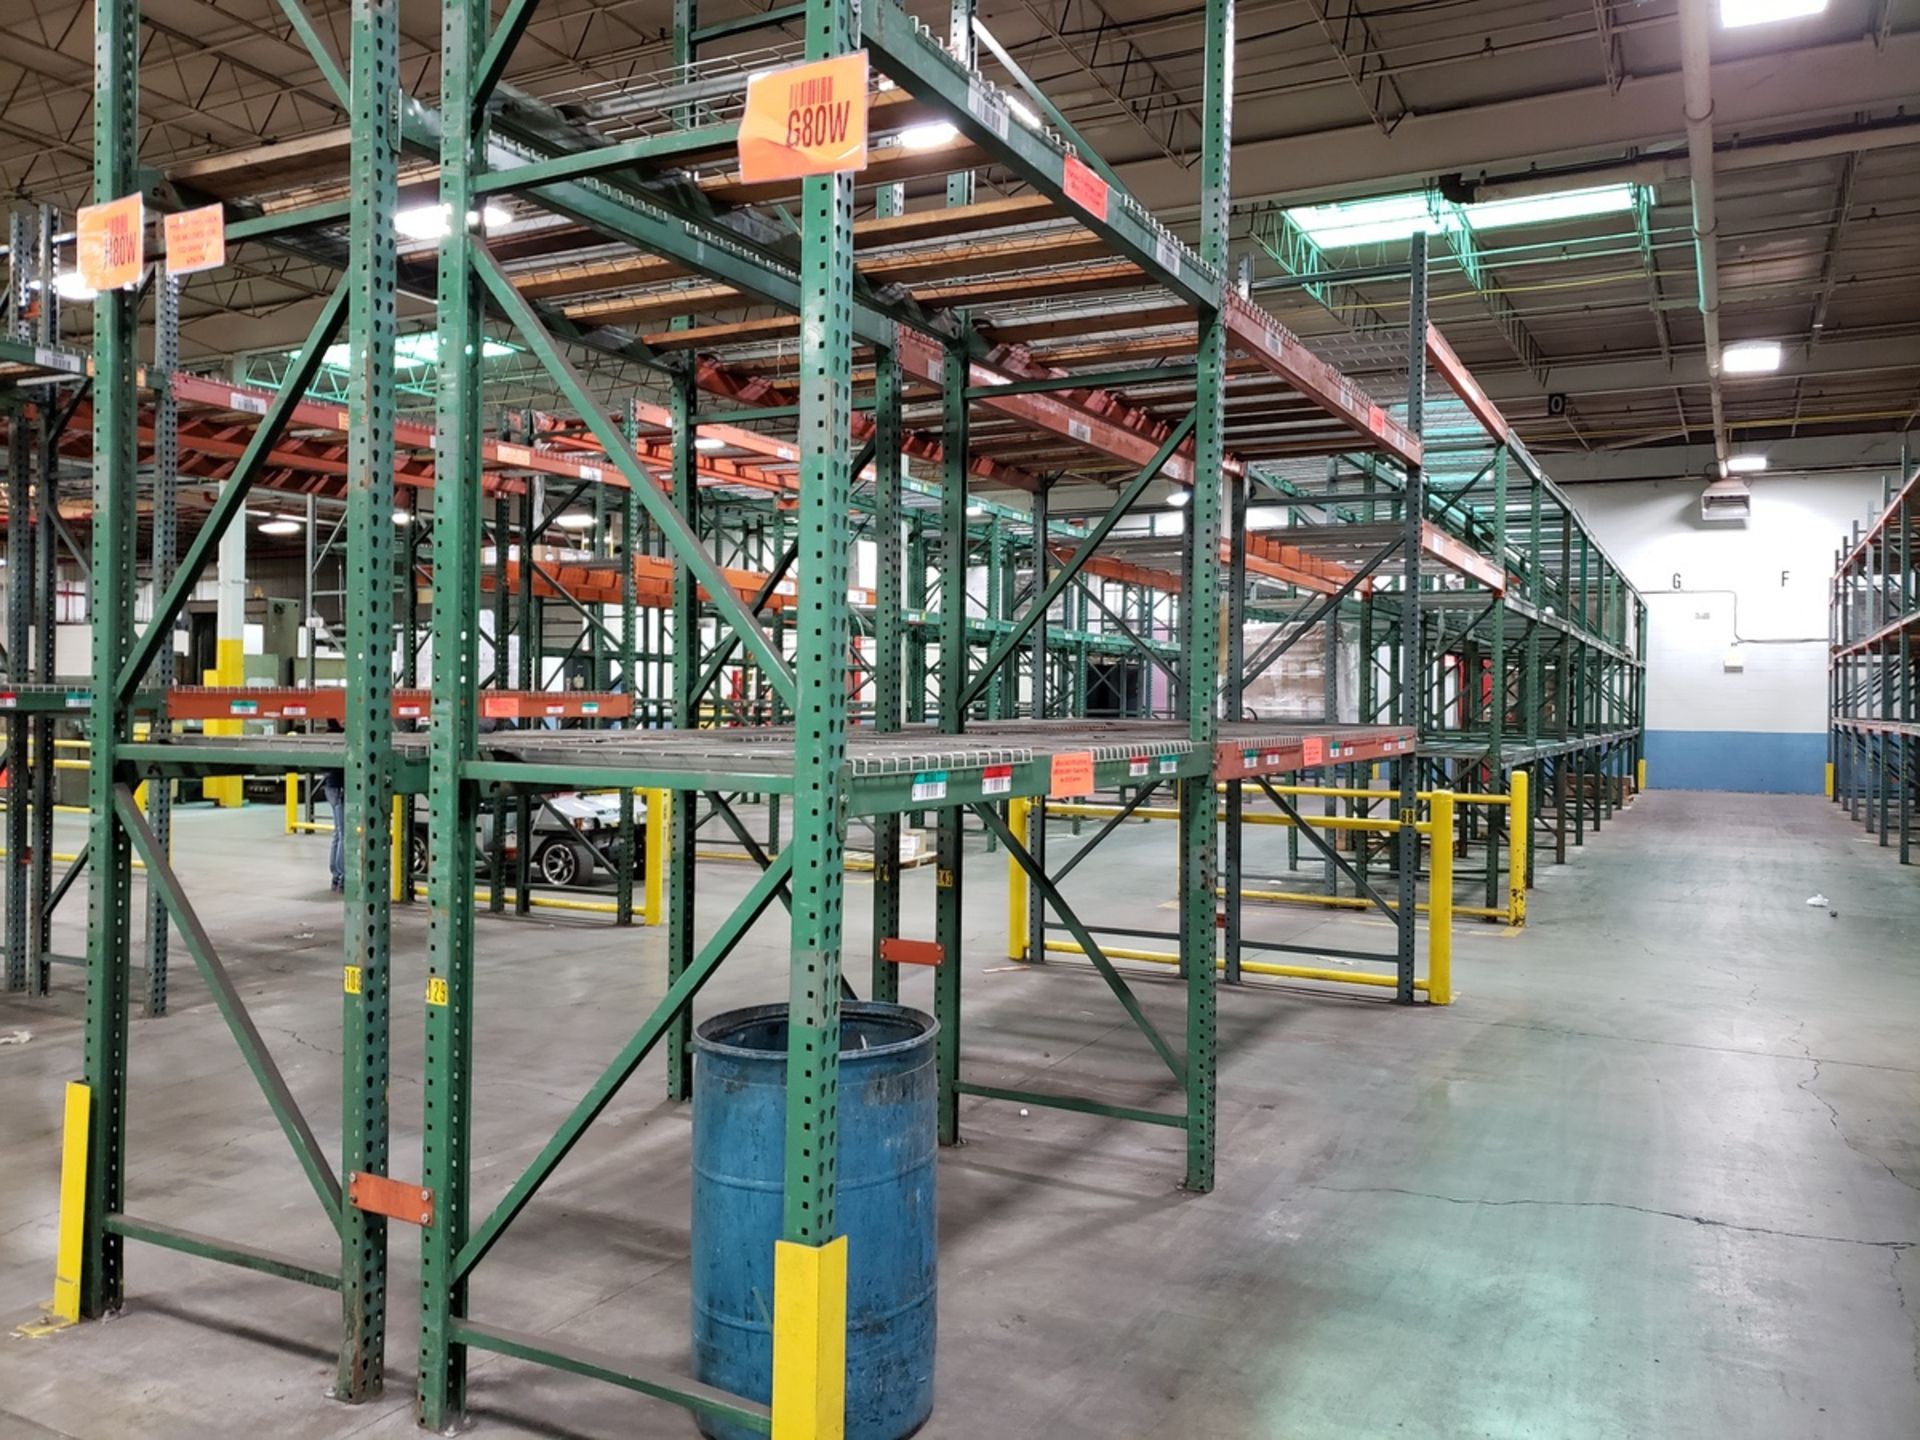 Pallet Rack Section, W/ (8) 42" X 15' Uprights, (18) 42" X 14' Up - Subj to Bulk | Rig Fee: See Desc - Image 2 of 2